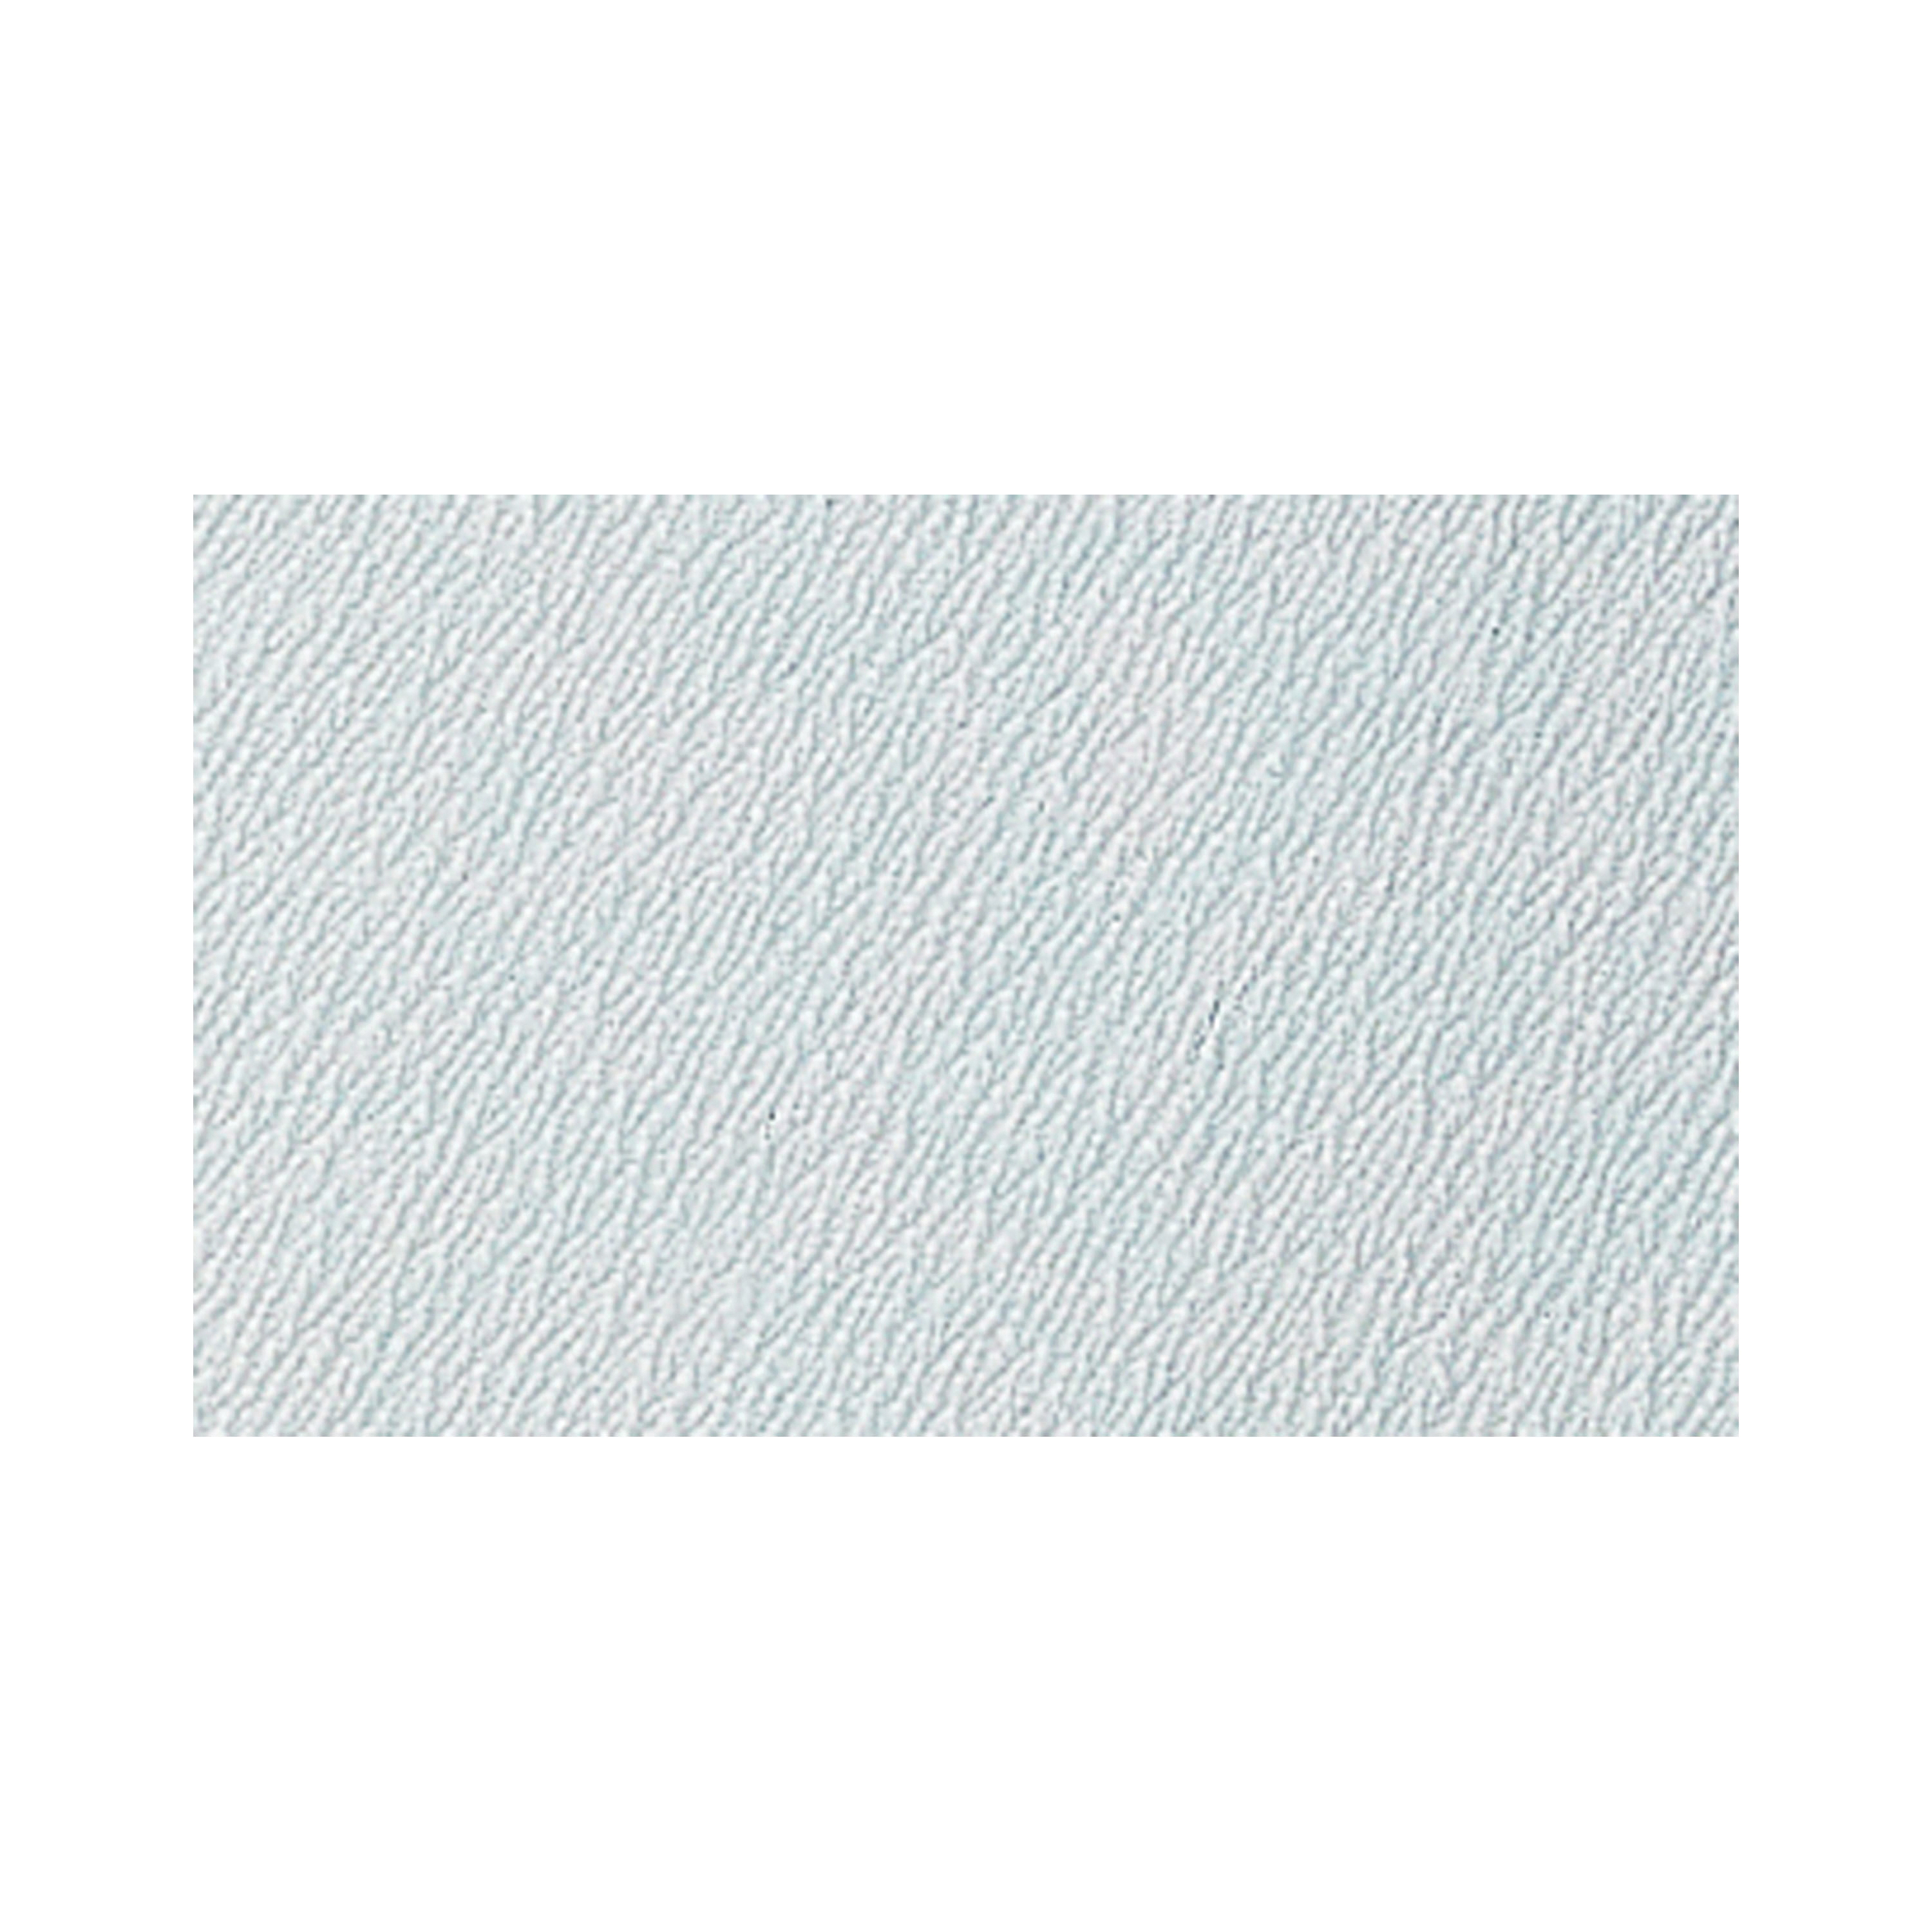 3M™ 051144-02355 435U Coated Sanding Sheet, 11 in L x 9 in W, 120 Grit, Fine Grade, Silicon Carbide Abrasive, Paper Backing